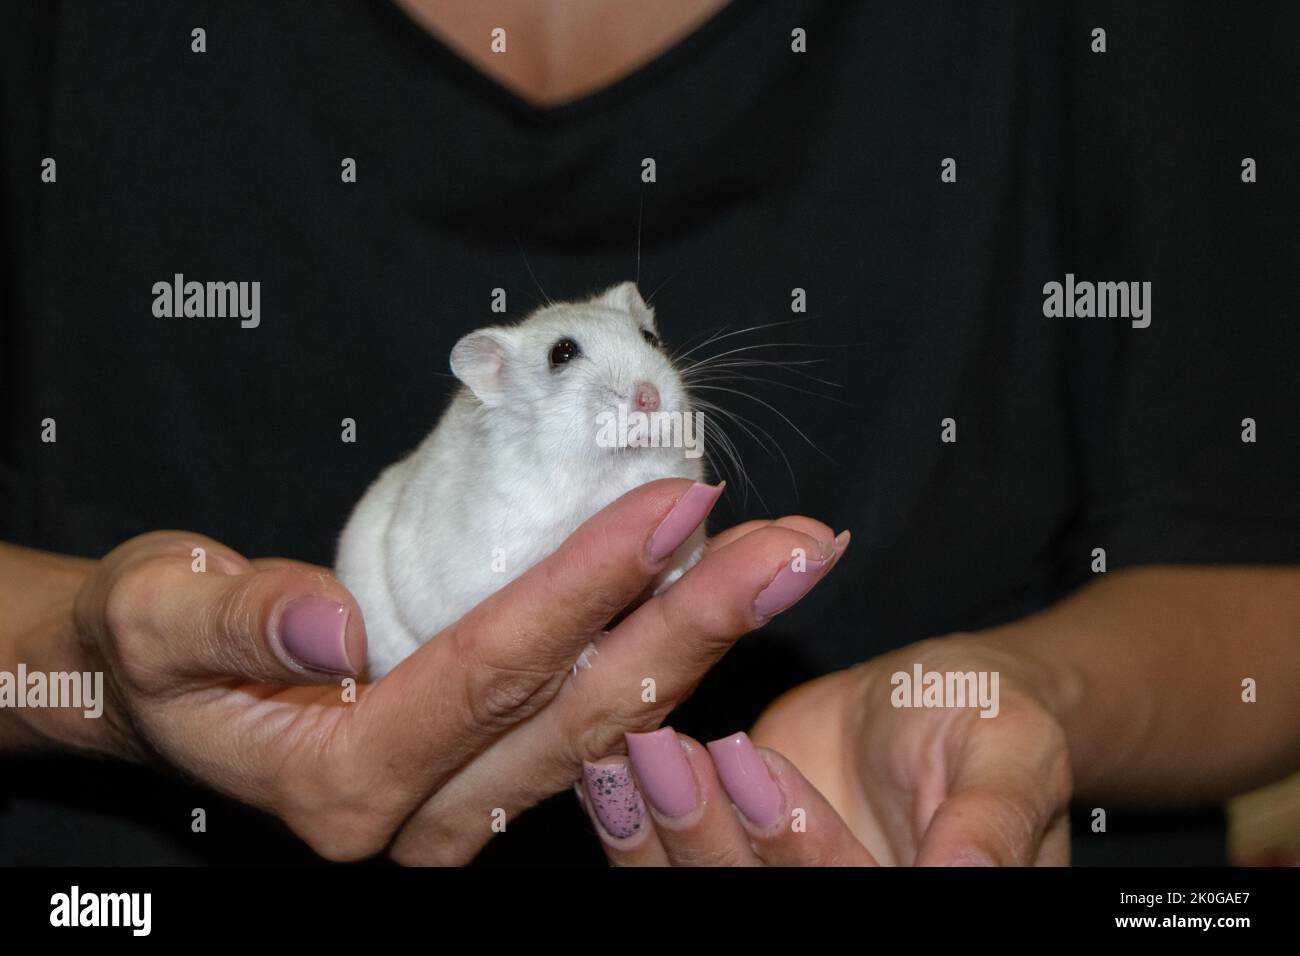 Little white Russian hamster handled by women. Women hands and nails. Pet business. Small domestic animals. Stock Photo